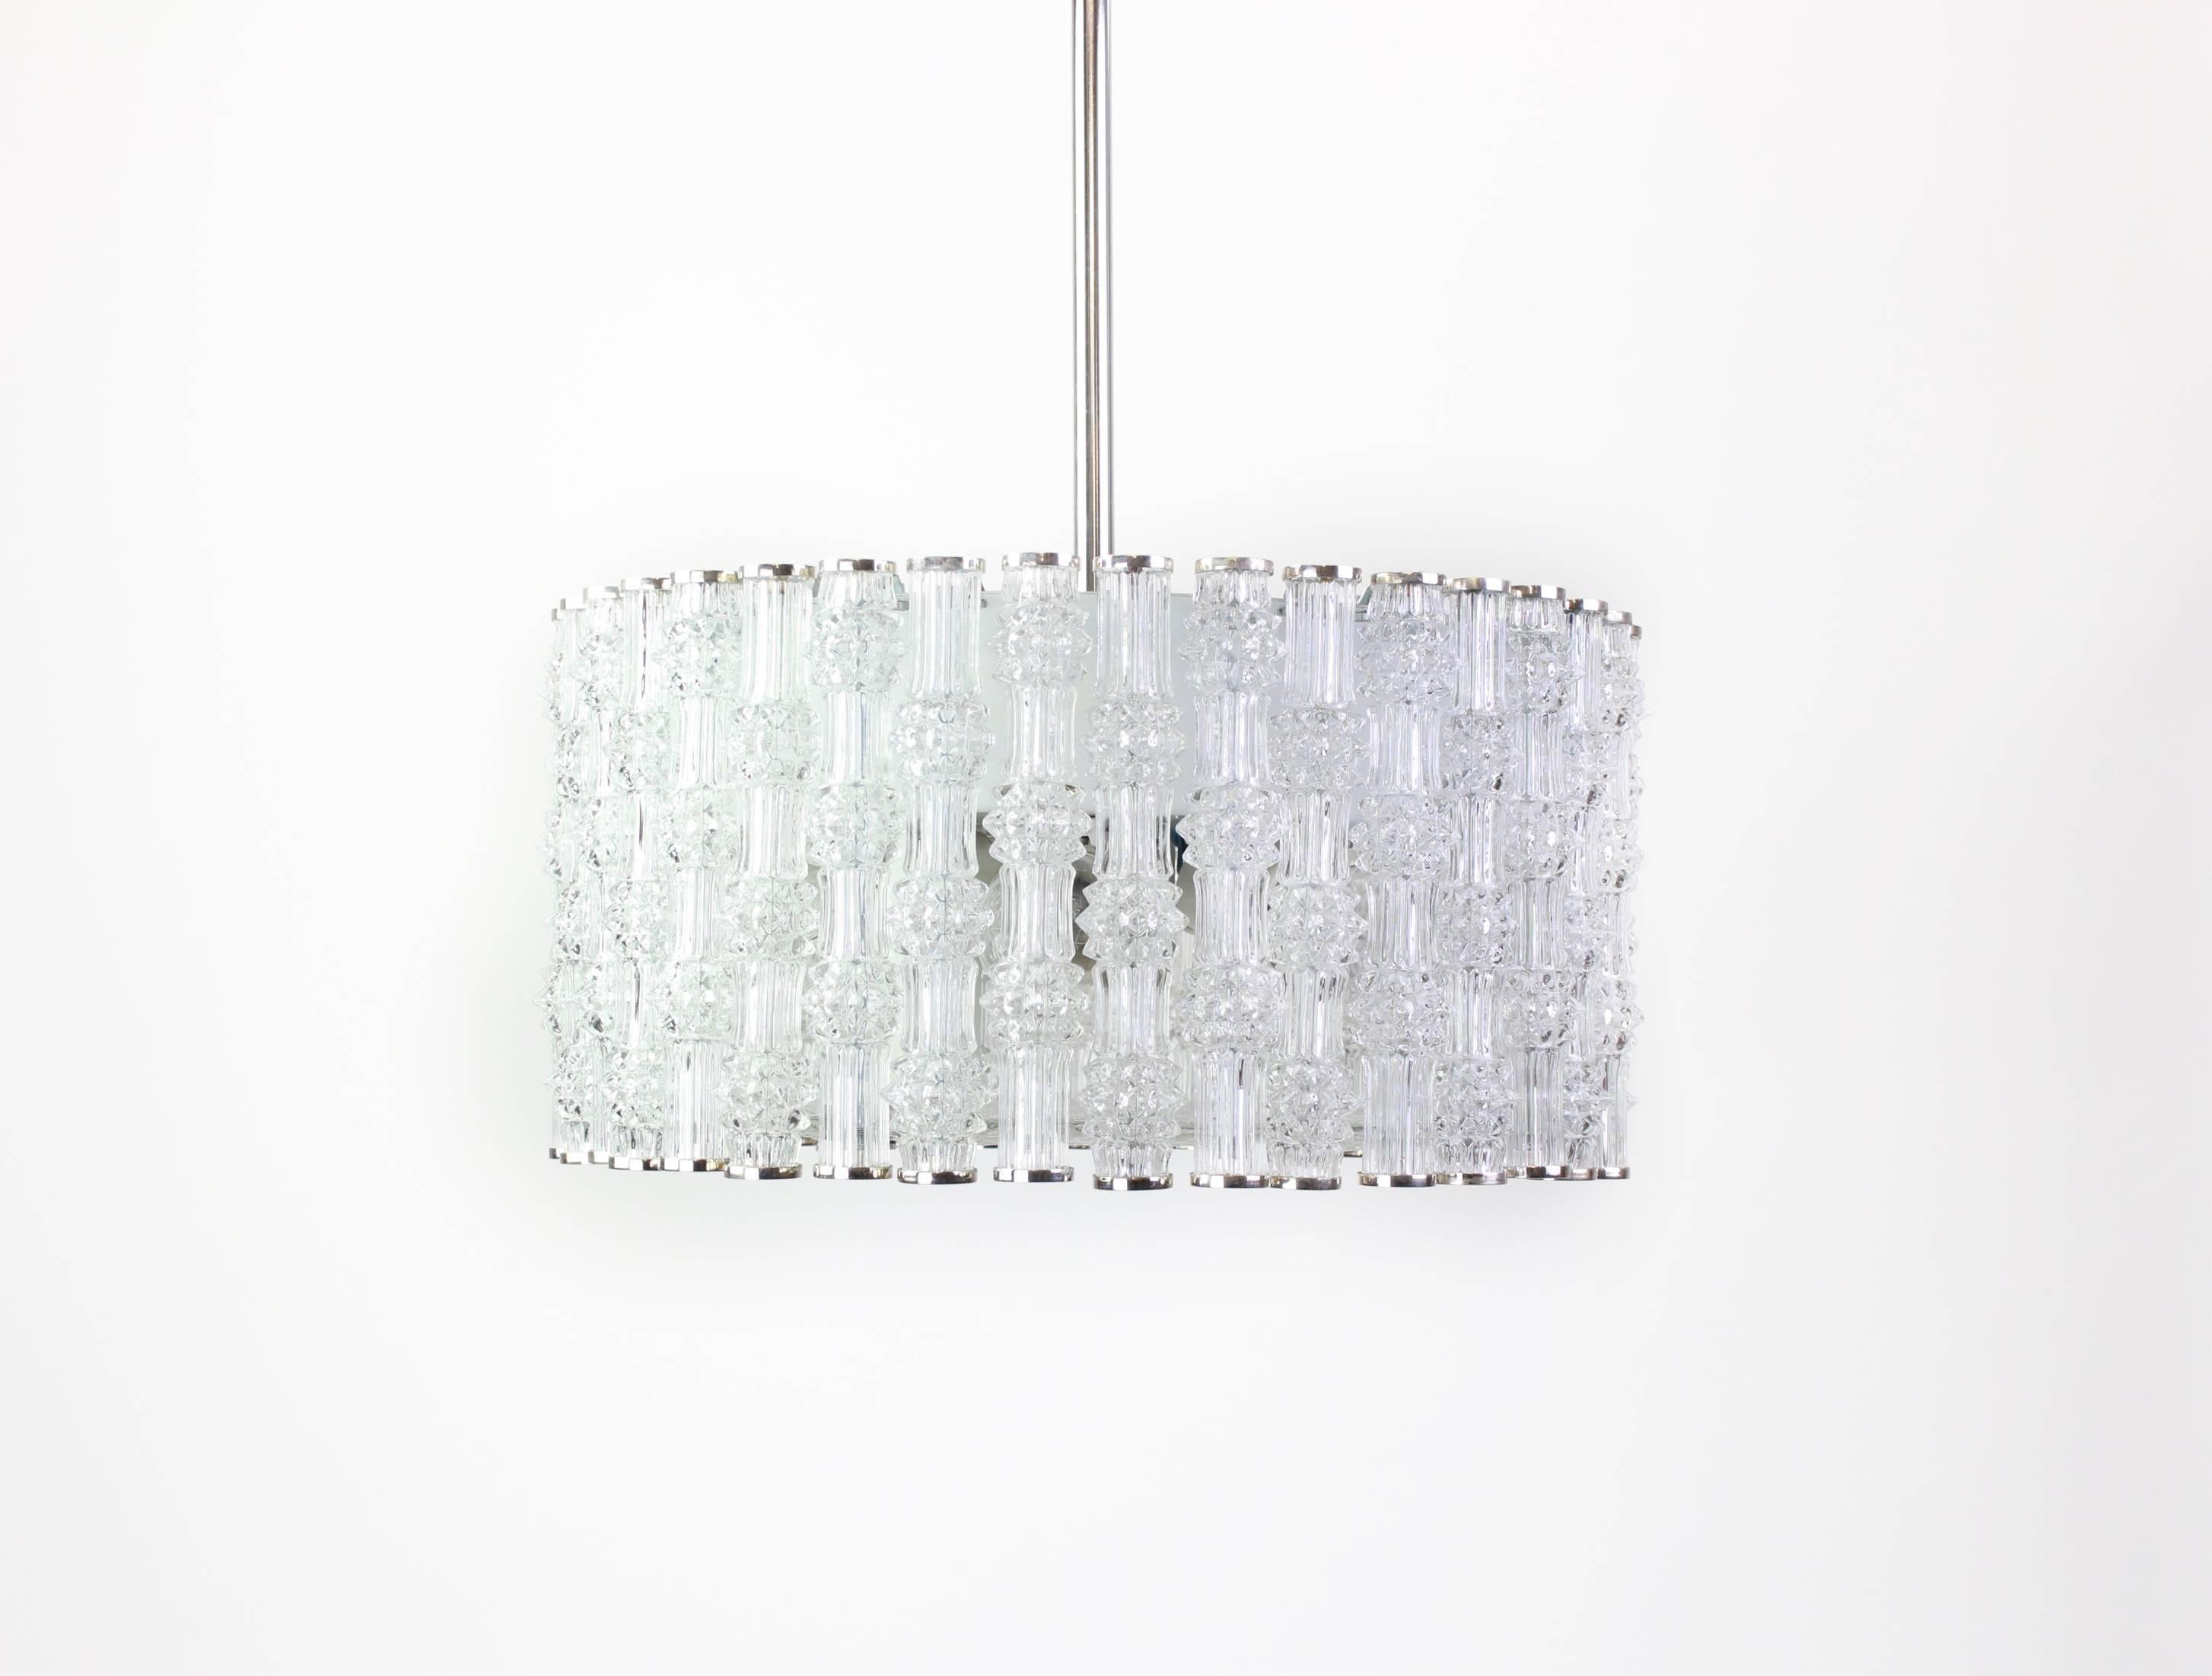 Chrome drum form pendant ceiling fixture with tubular textured glass shades by Kaiser Leuchten, Germany, circa in the 1960s.

High quality and in very good condition. Cleaned, well-wired and ready to use. 

The fixture requires 6 x E27 Standard